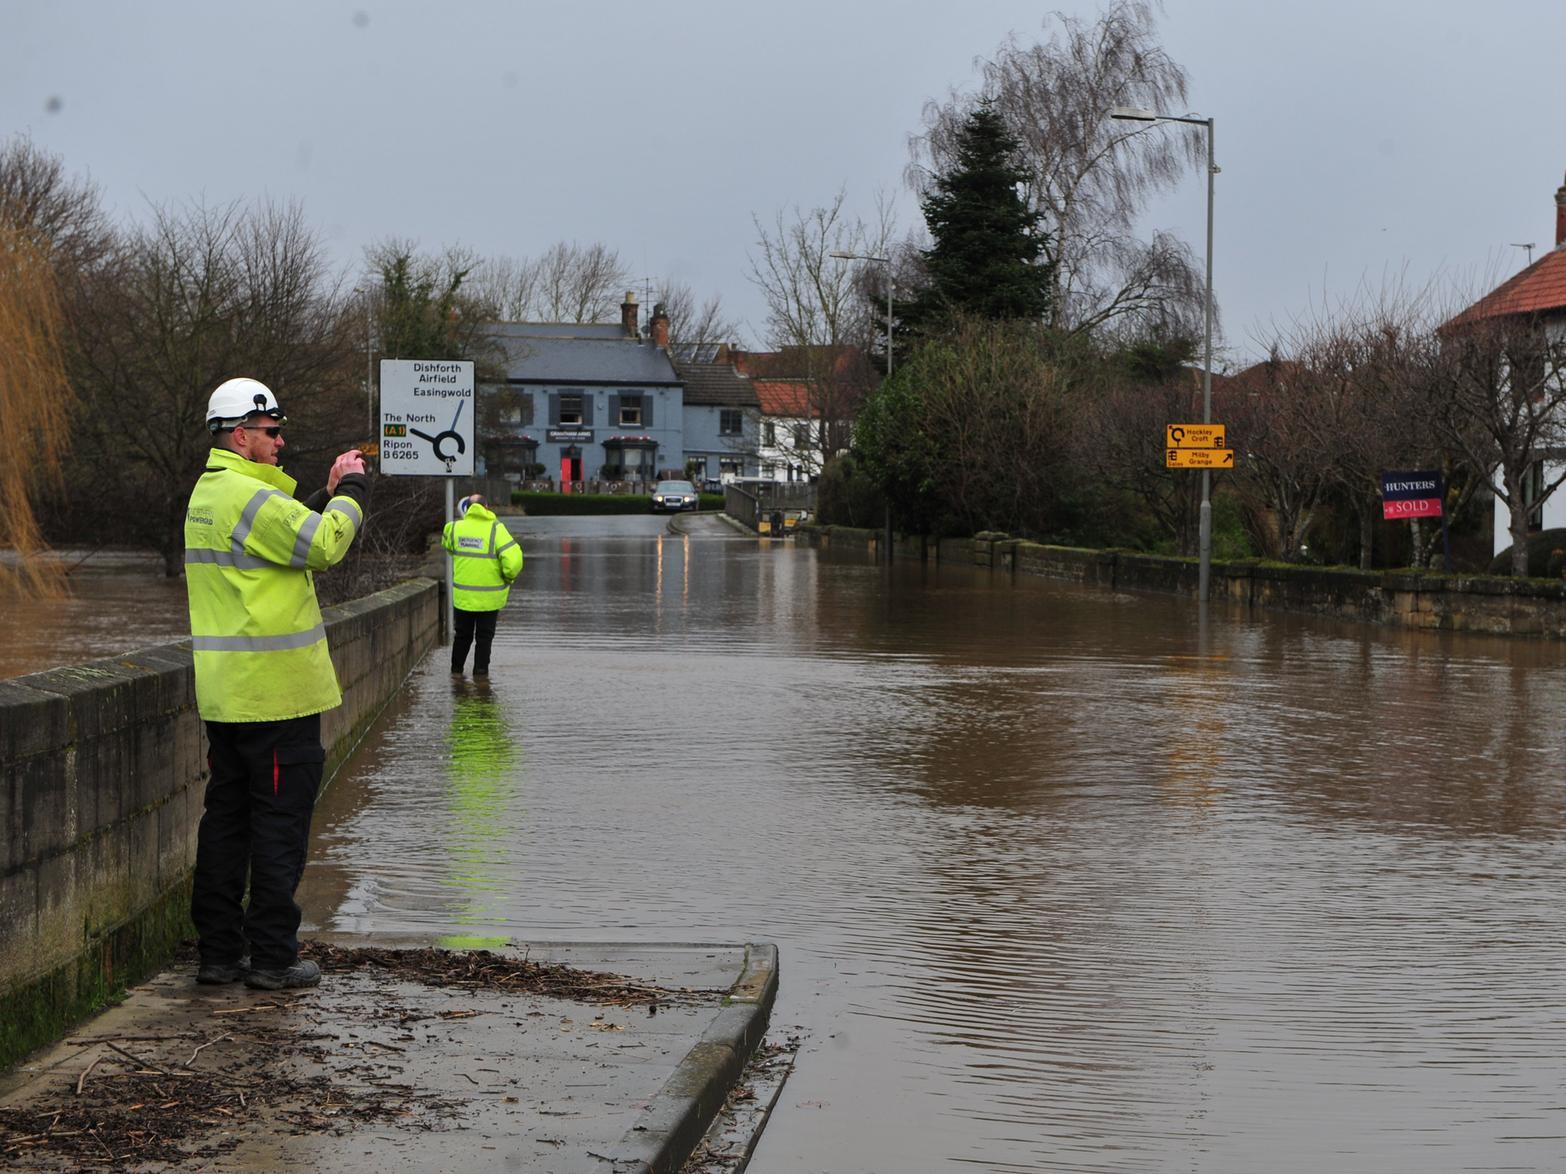 The flood warning remains in place for Boroughbridge.